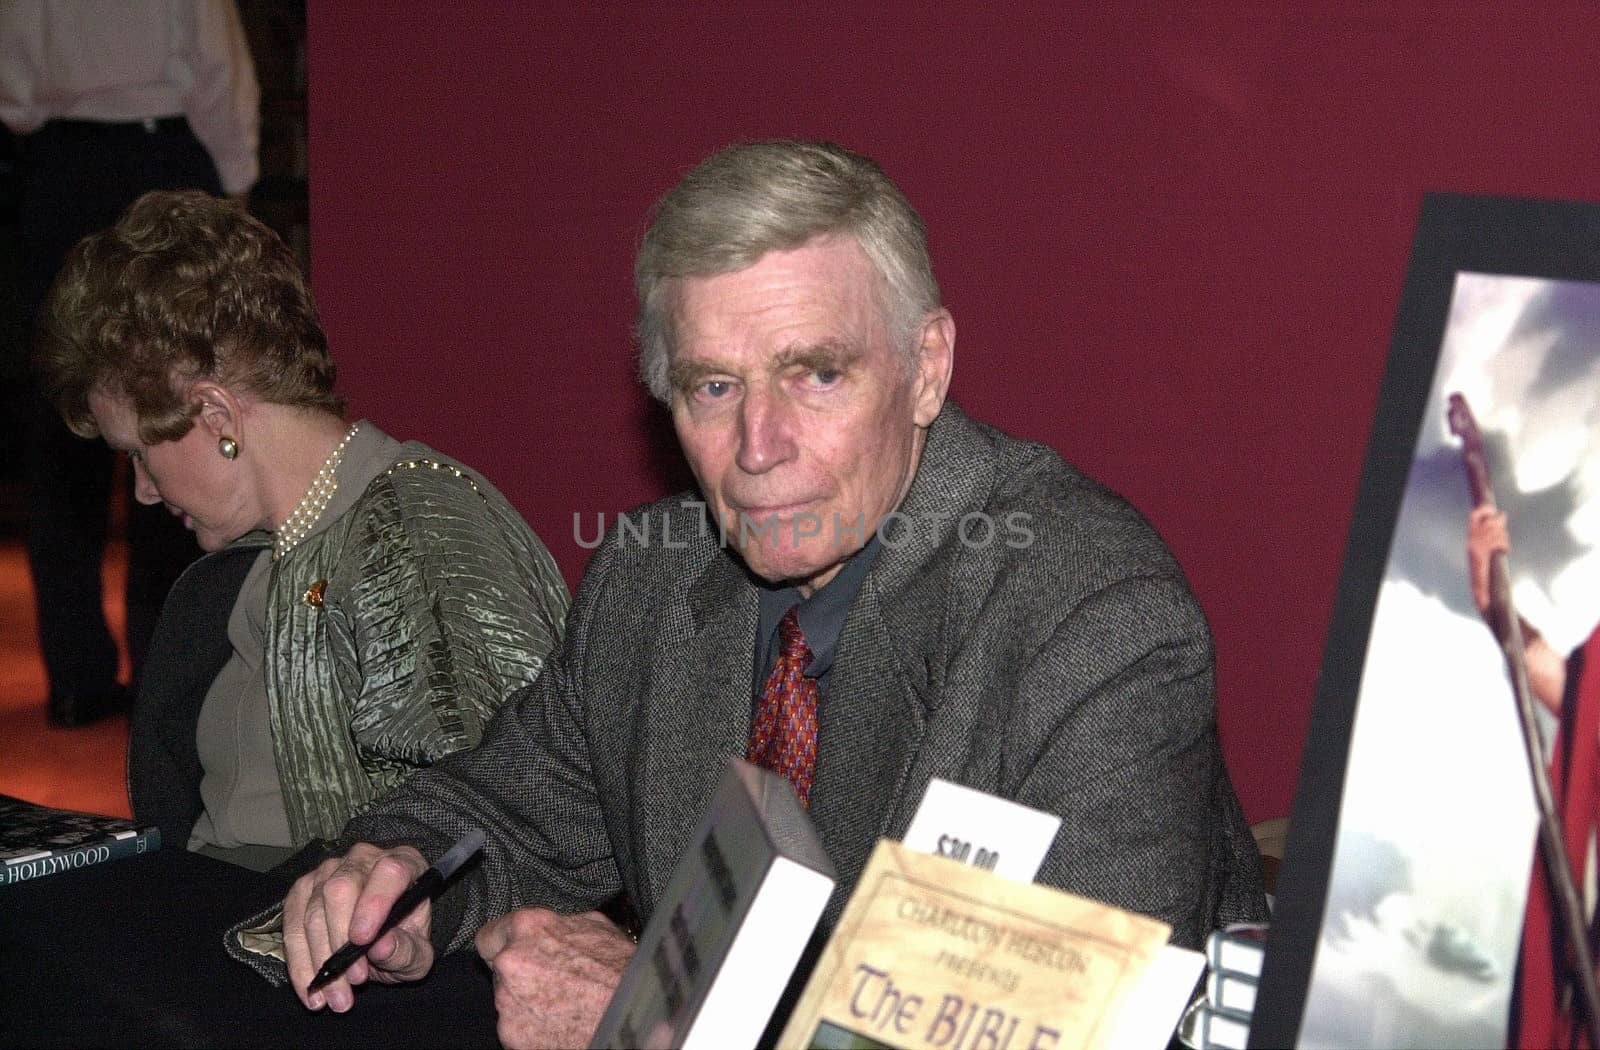 Charleton Heston at the American Cinematheque's tribute to "Ben Hur" at the Egyptian Theater, Hollywood, 02-02-00